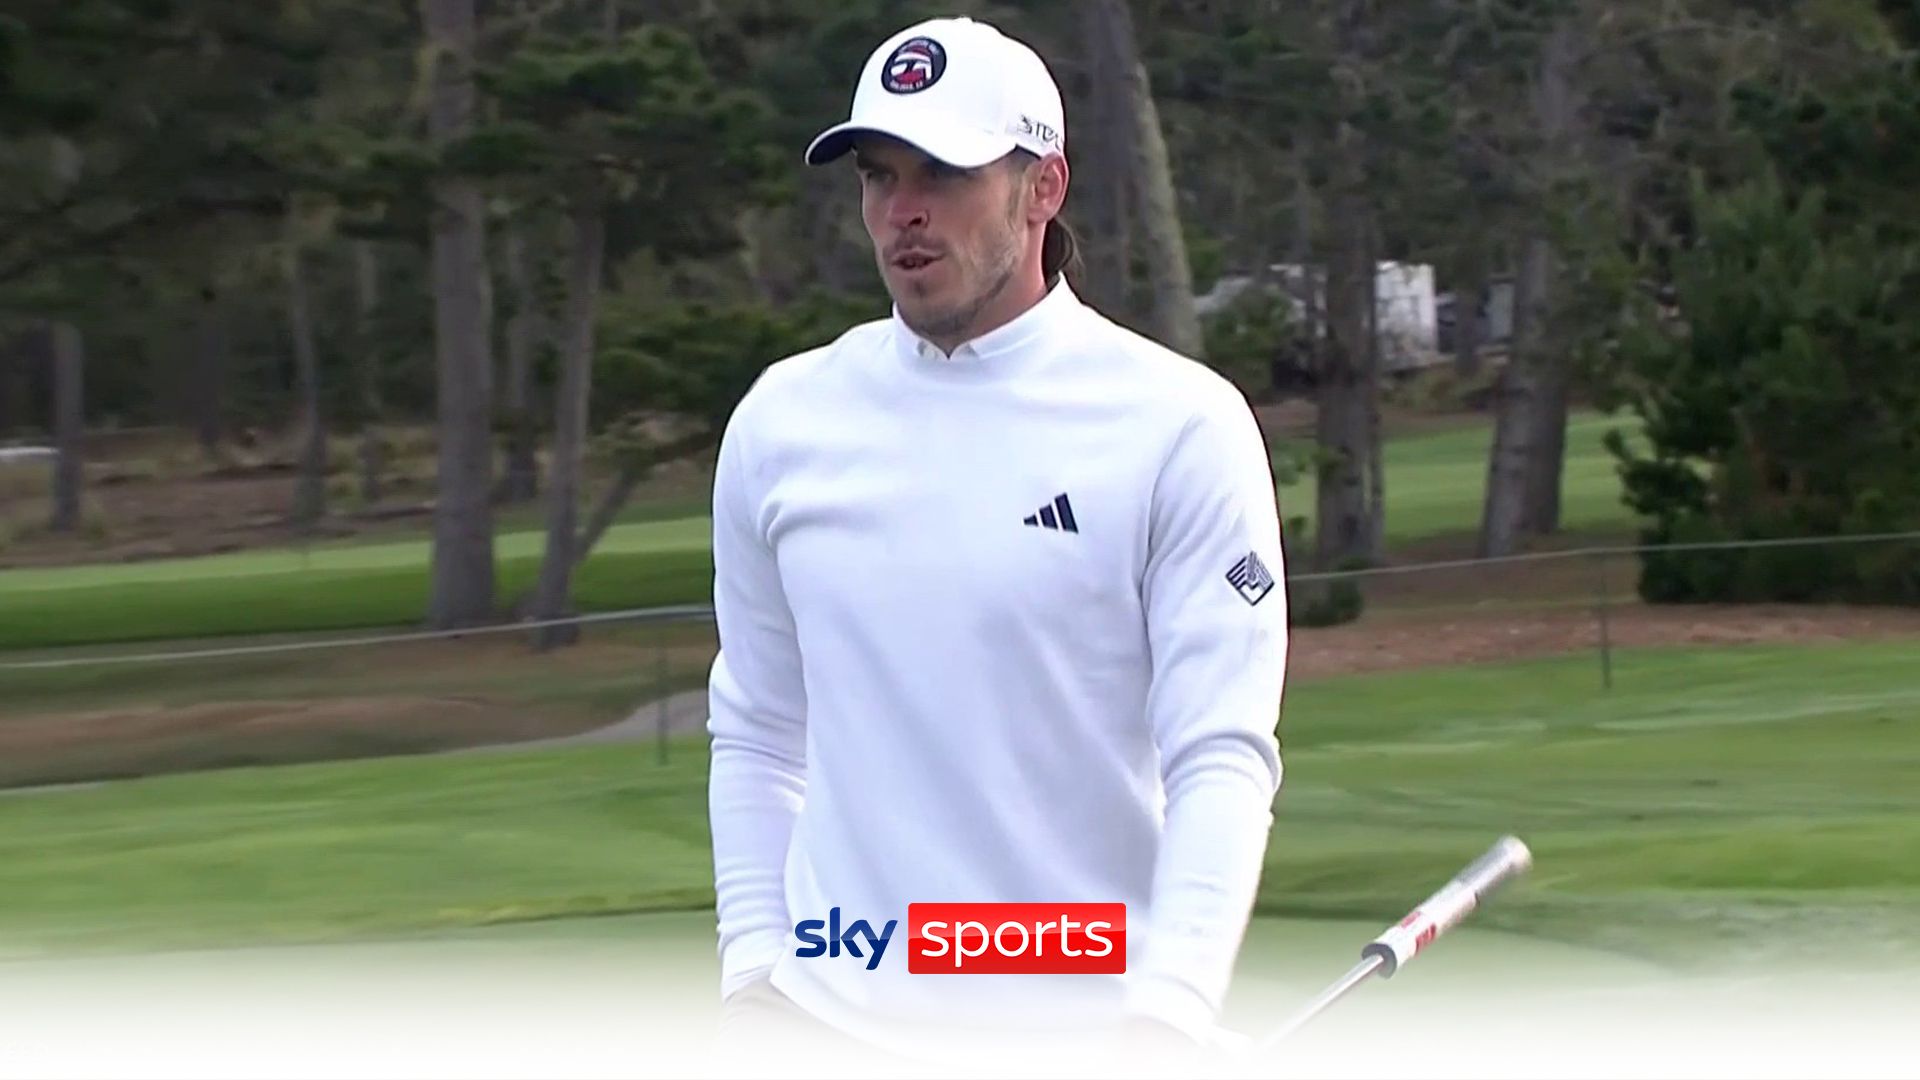 'I really like what I'm seeing!' | Bale recovers from bunker to par first hole